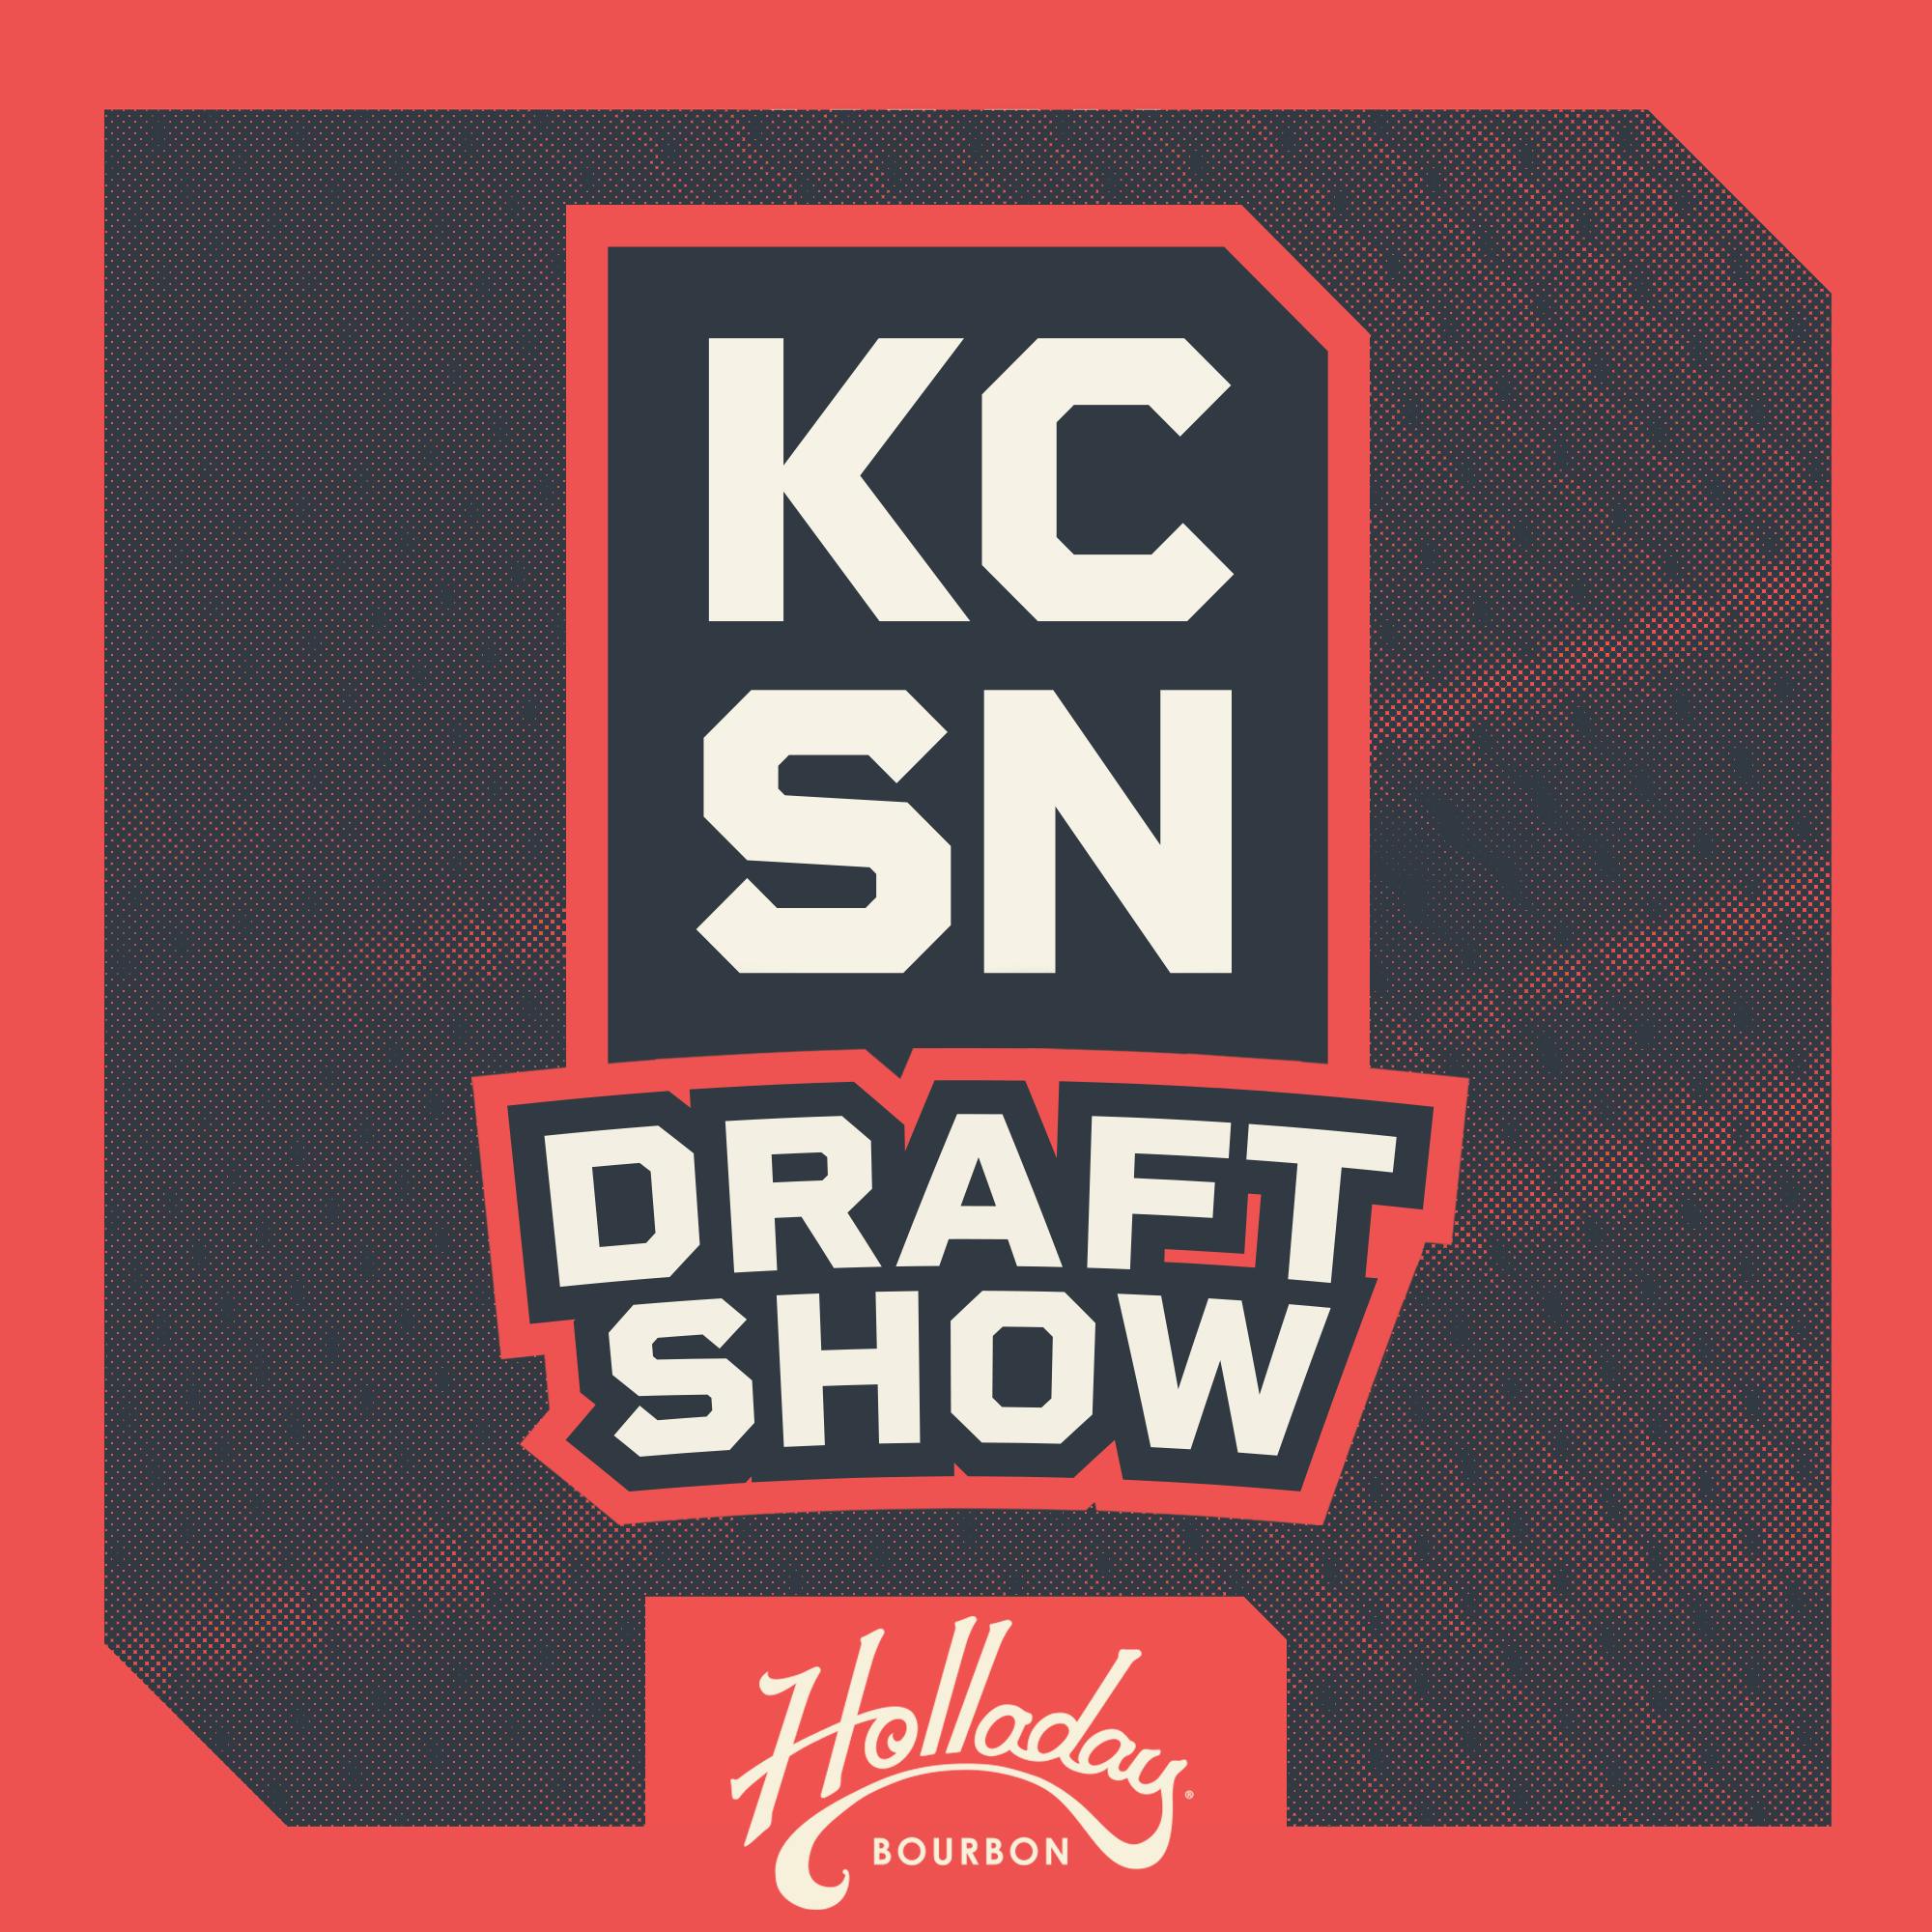 KCSN Draft Show 3/29: Exclusive 2024 NFL Draft Interviews with Walter Rouse, Anim Dankwah, and Andrew Coker